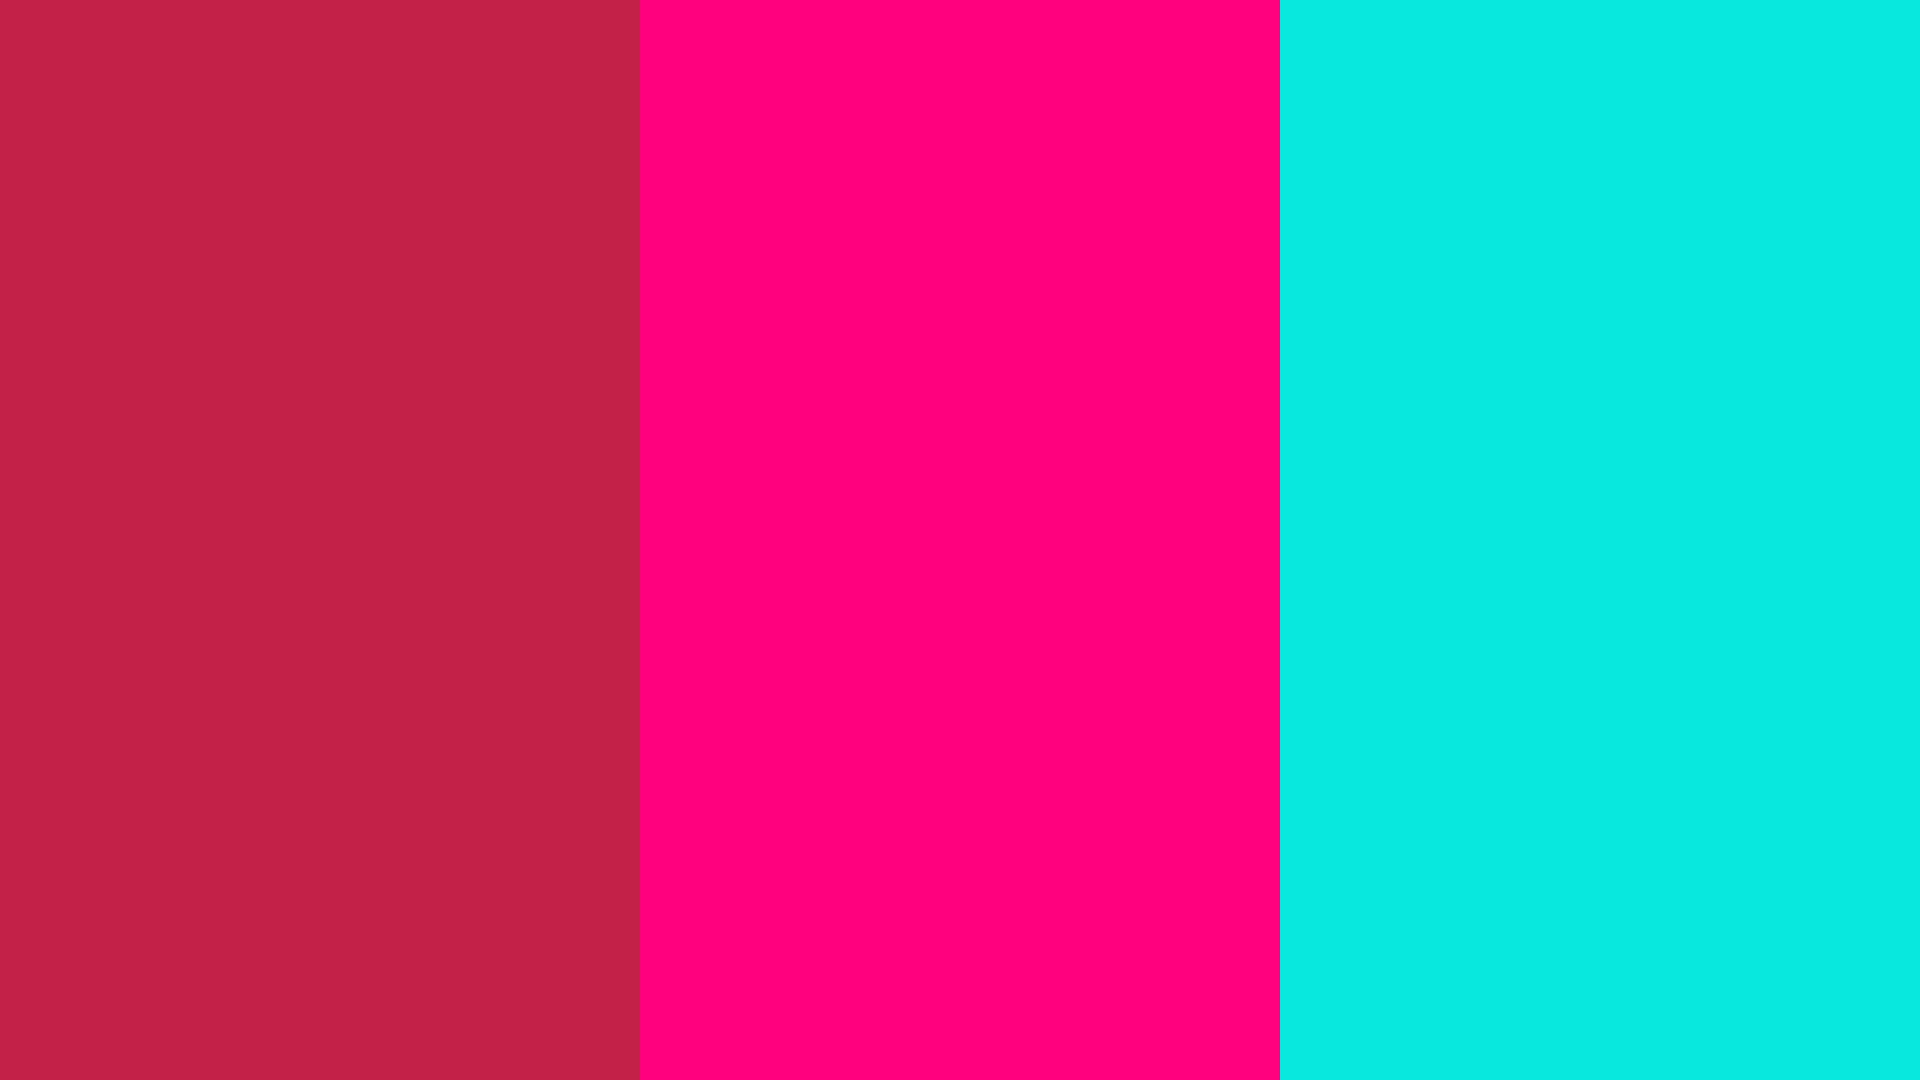 Free download Bright Maroon Bright Pink and Bright Turquoise Three Color  Background [1920x1080] for your Desktop, Mobile & Tablet | Explore 67+  Bright Color Background | Bright Color Backgrounds, Bright Color Wallpaper,  Bright Backgrounds